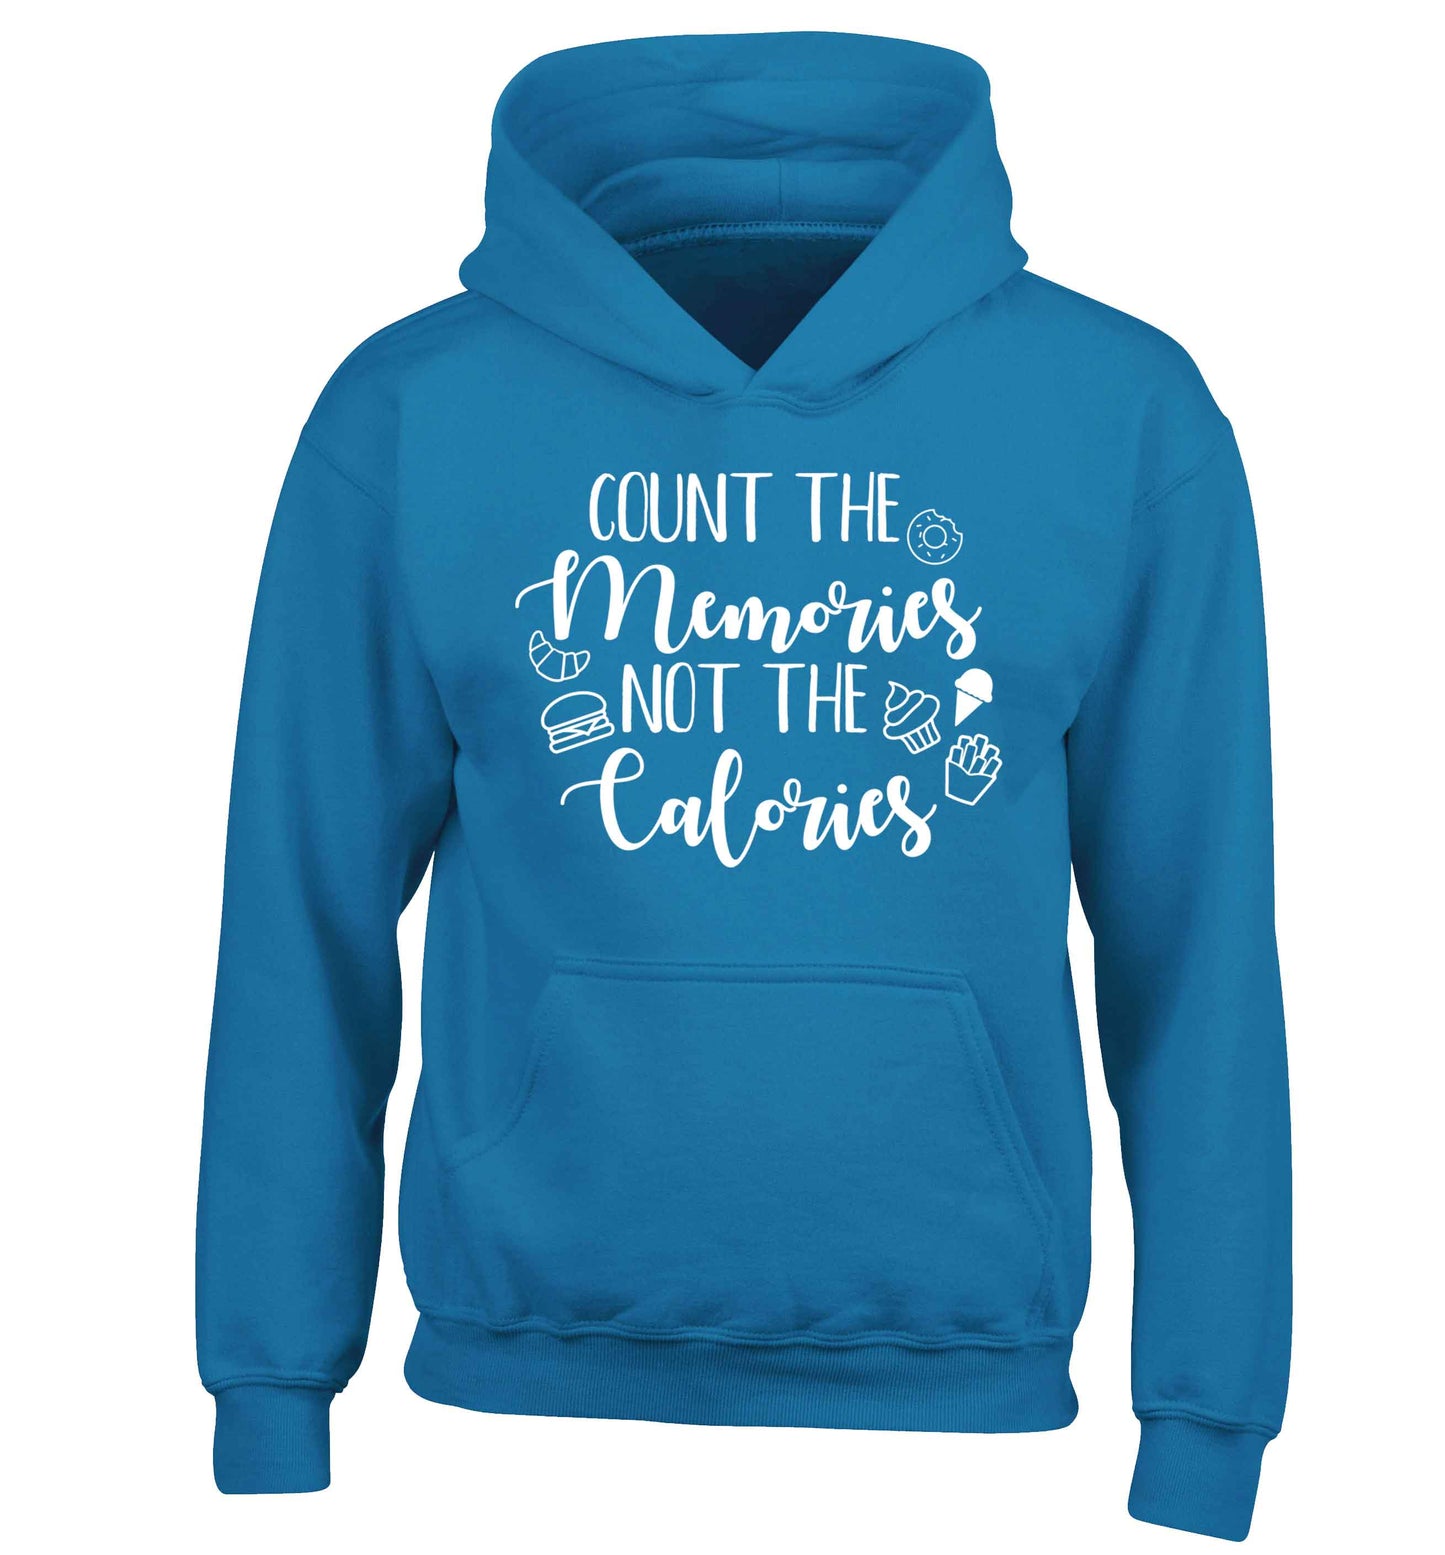 Count the memories not the calories children's blue hoodie 12-13 Years